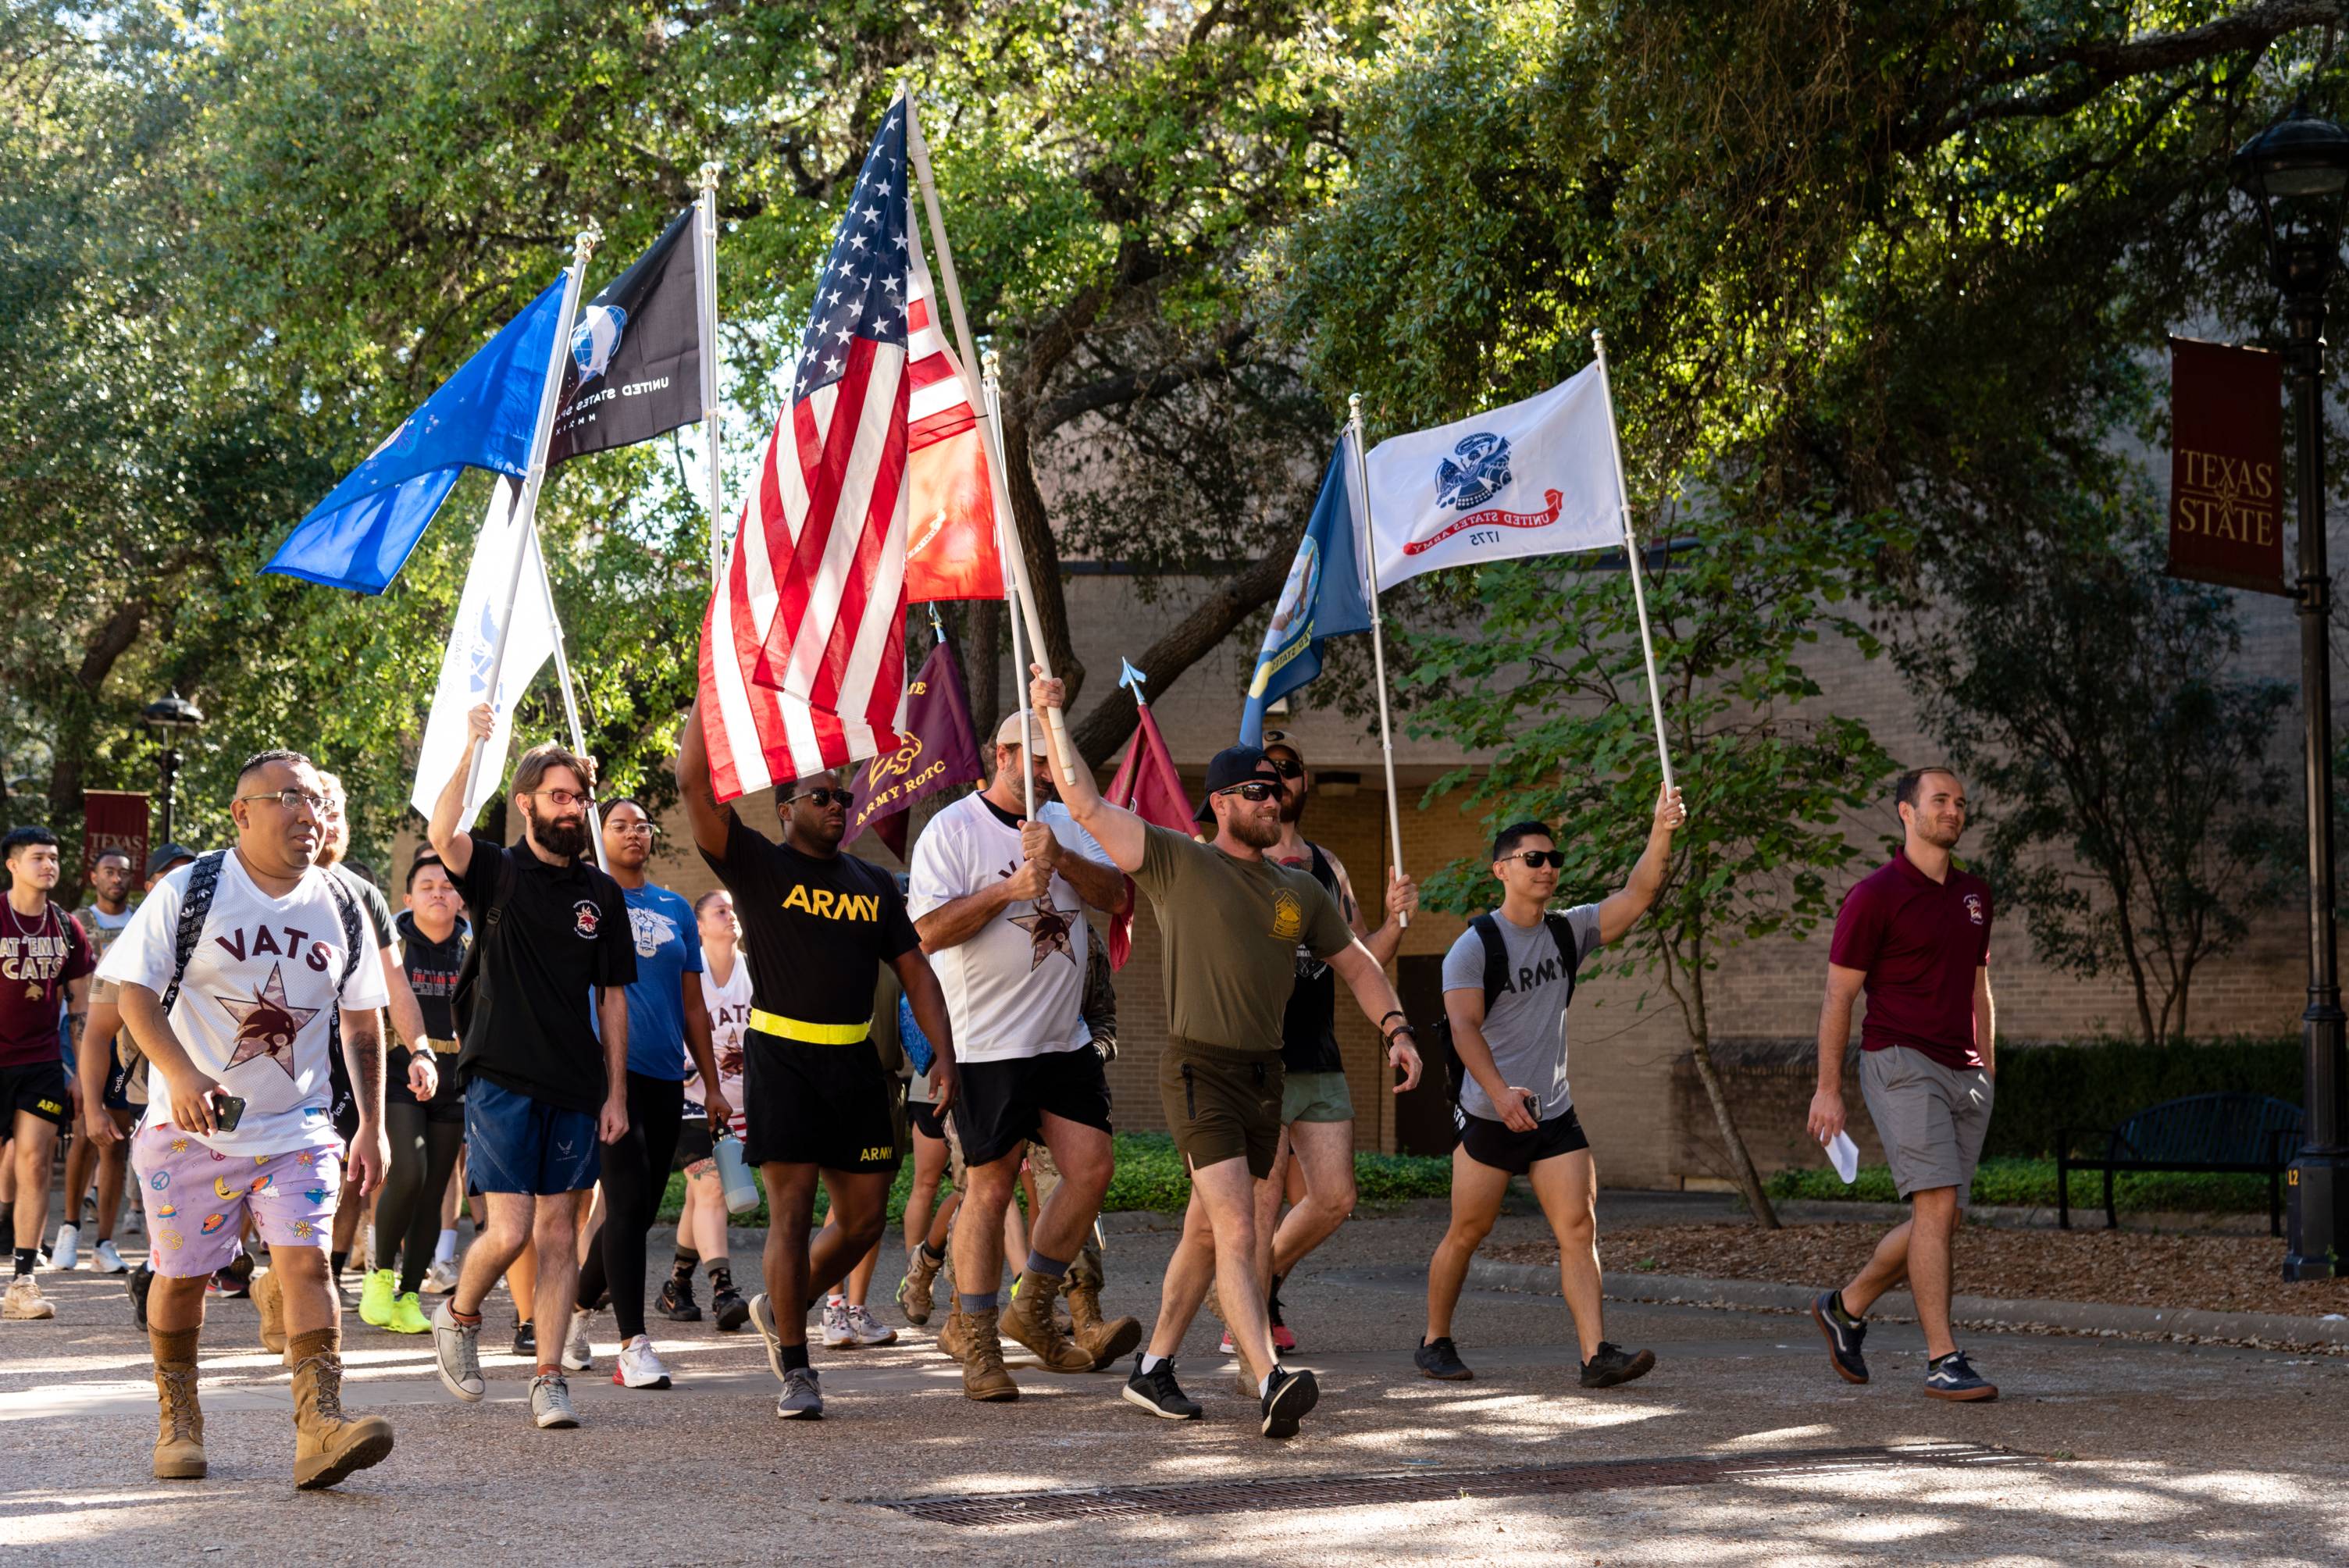 Veterans Alliance of Texas State - Silkie Hike